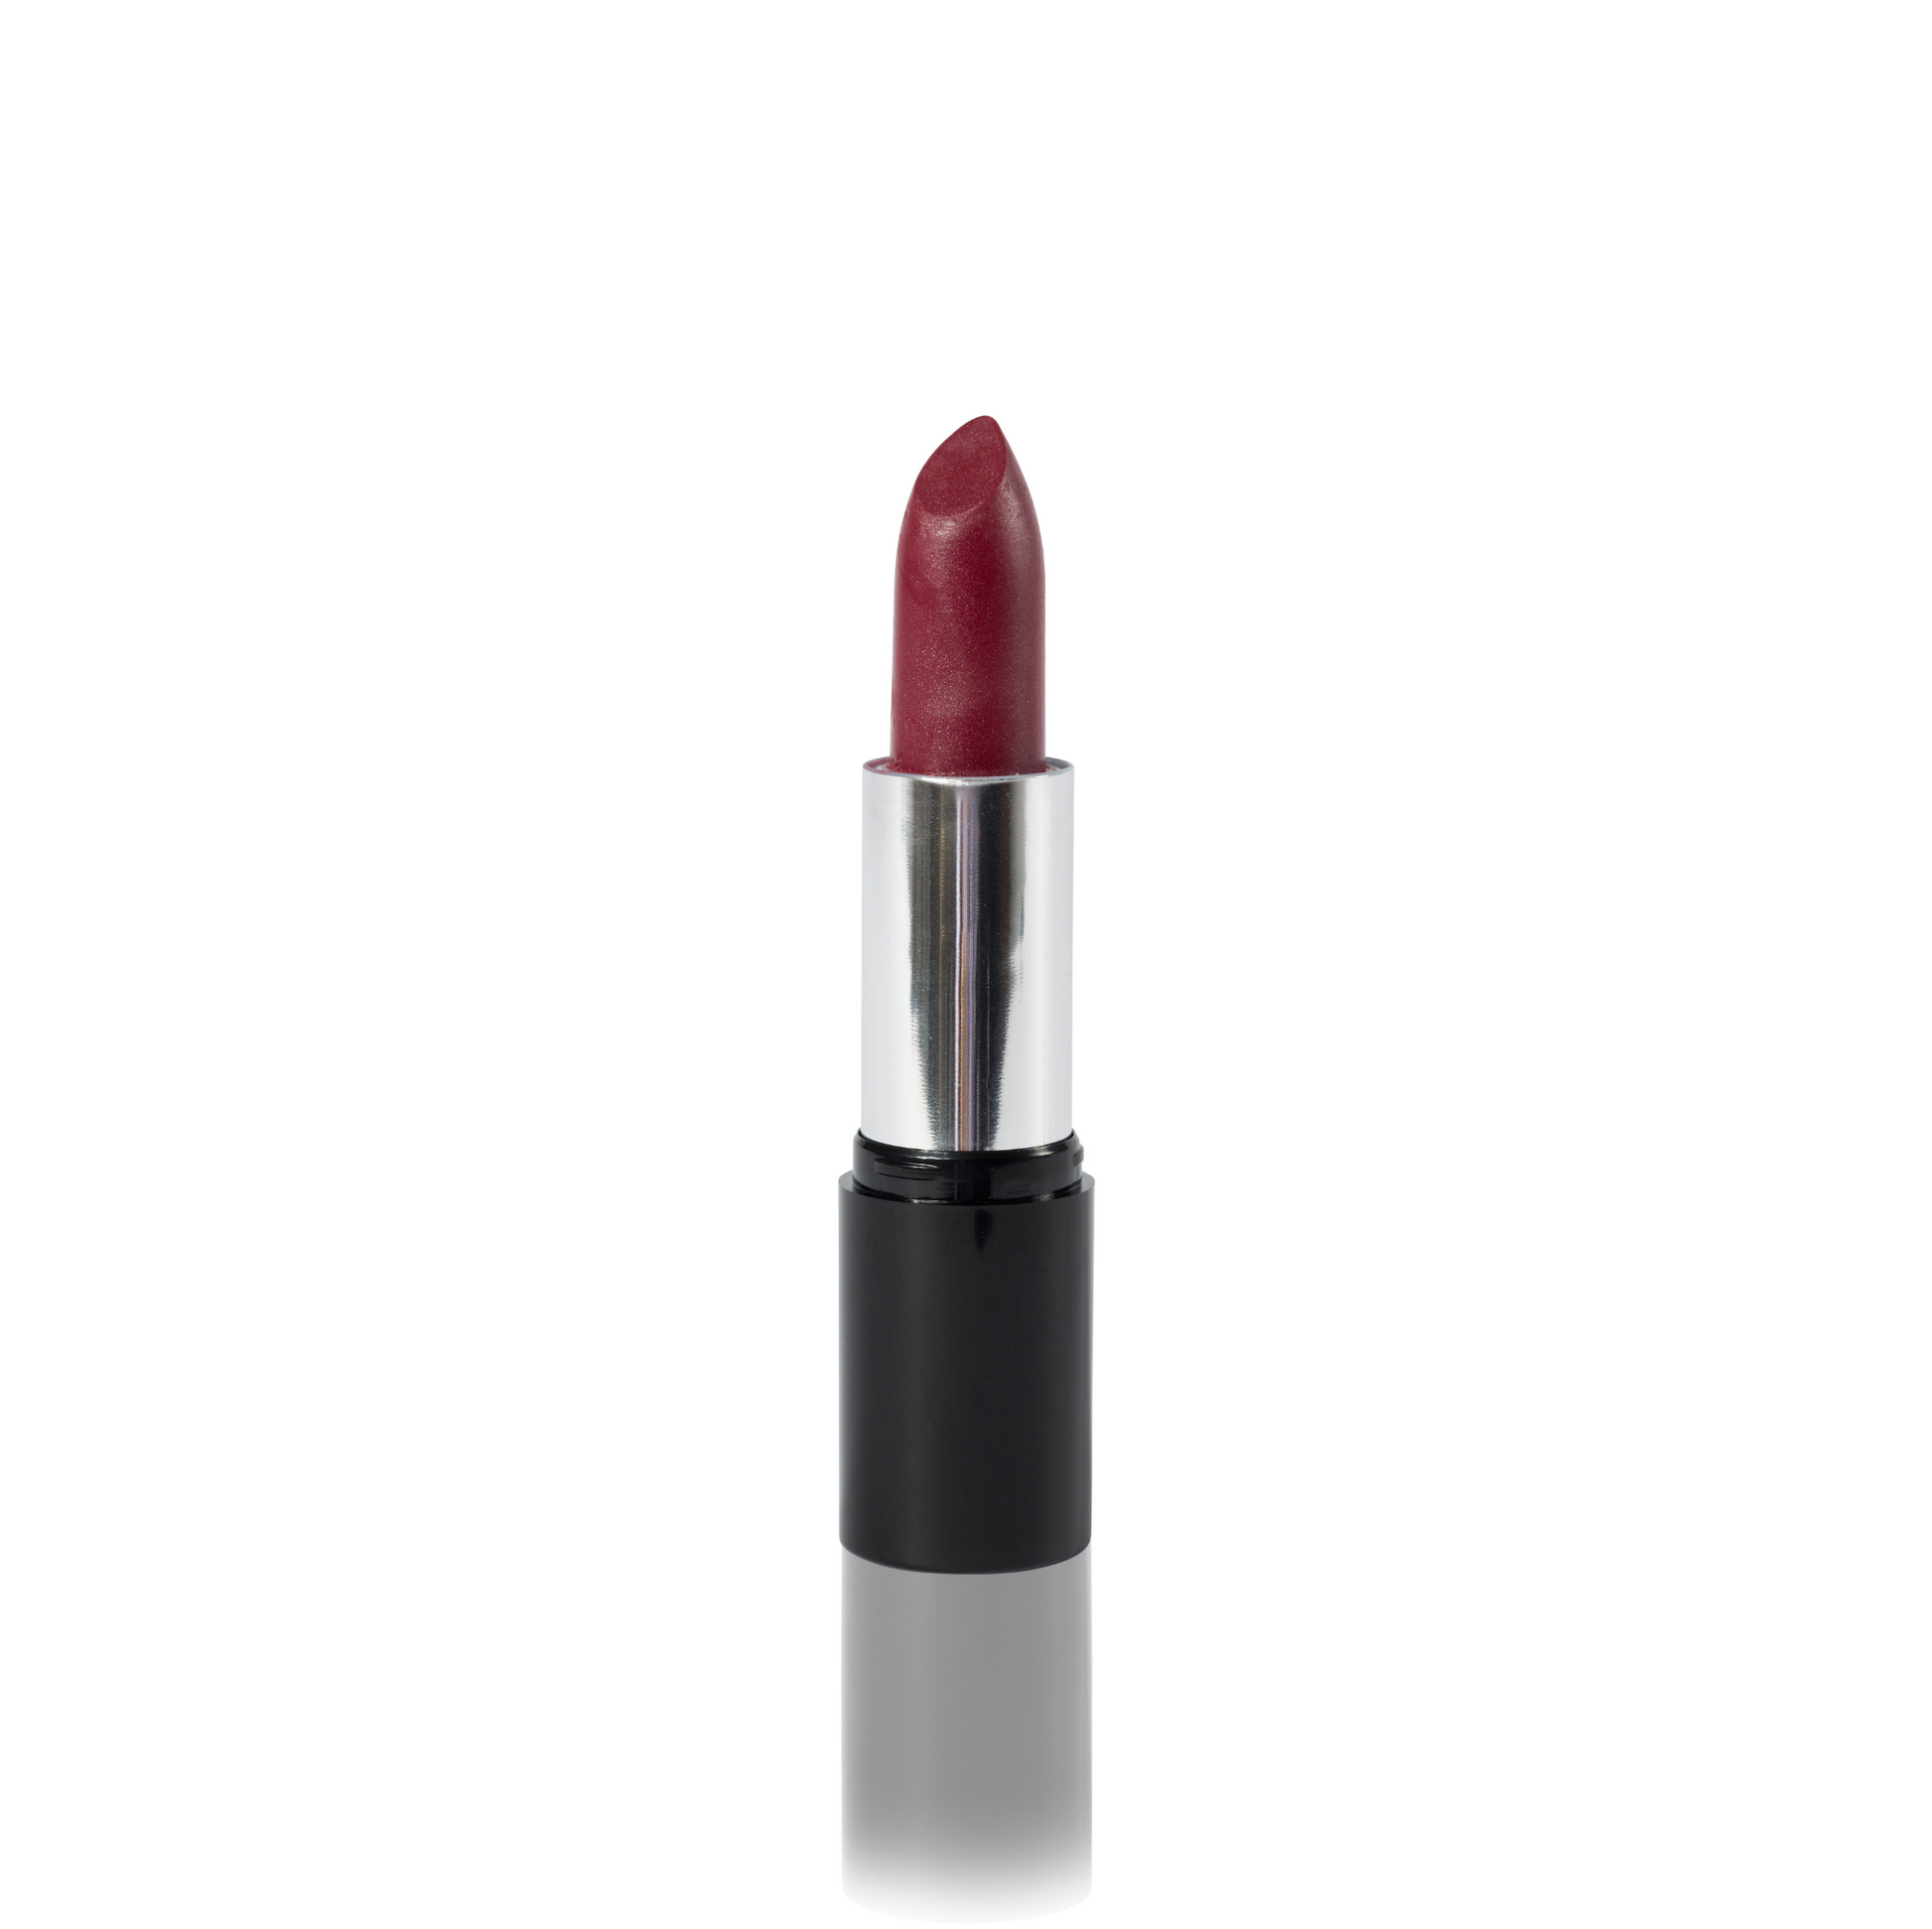 A single tube of the odylique raspberry coulis natural lipstick with the cap removed, revealing the dark pink shade, set against a plain white background.